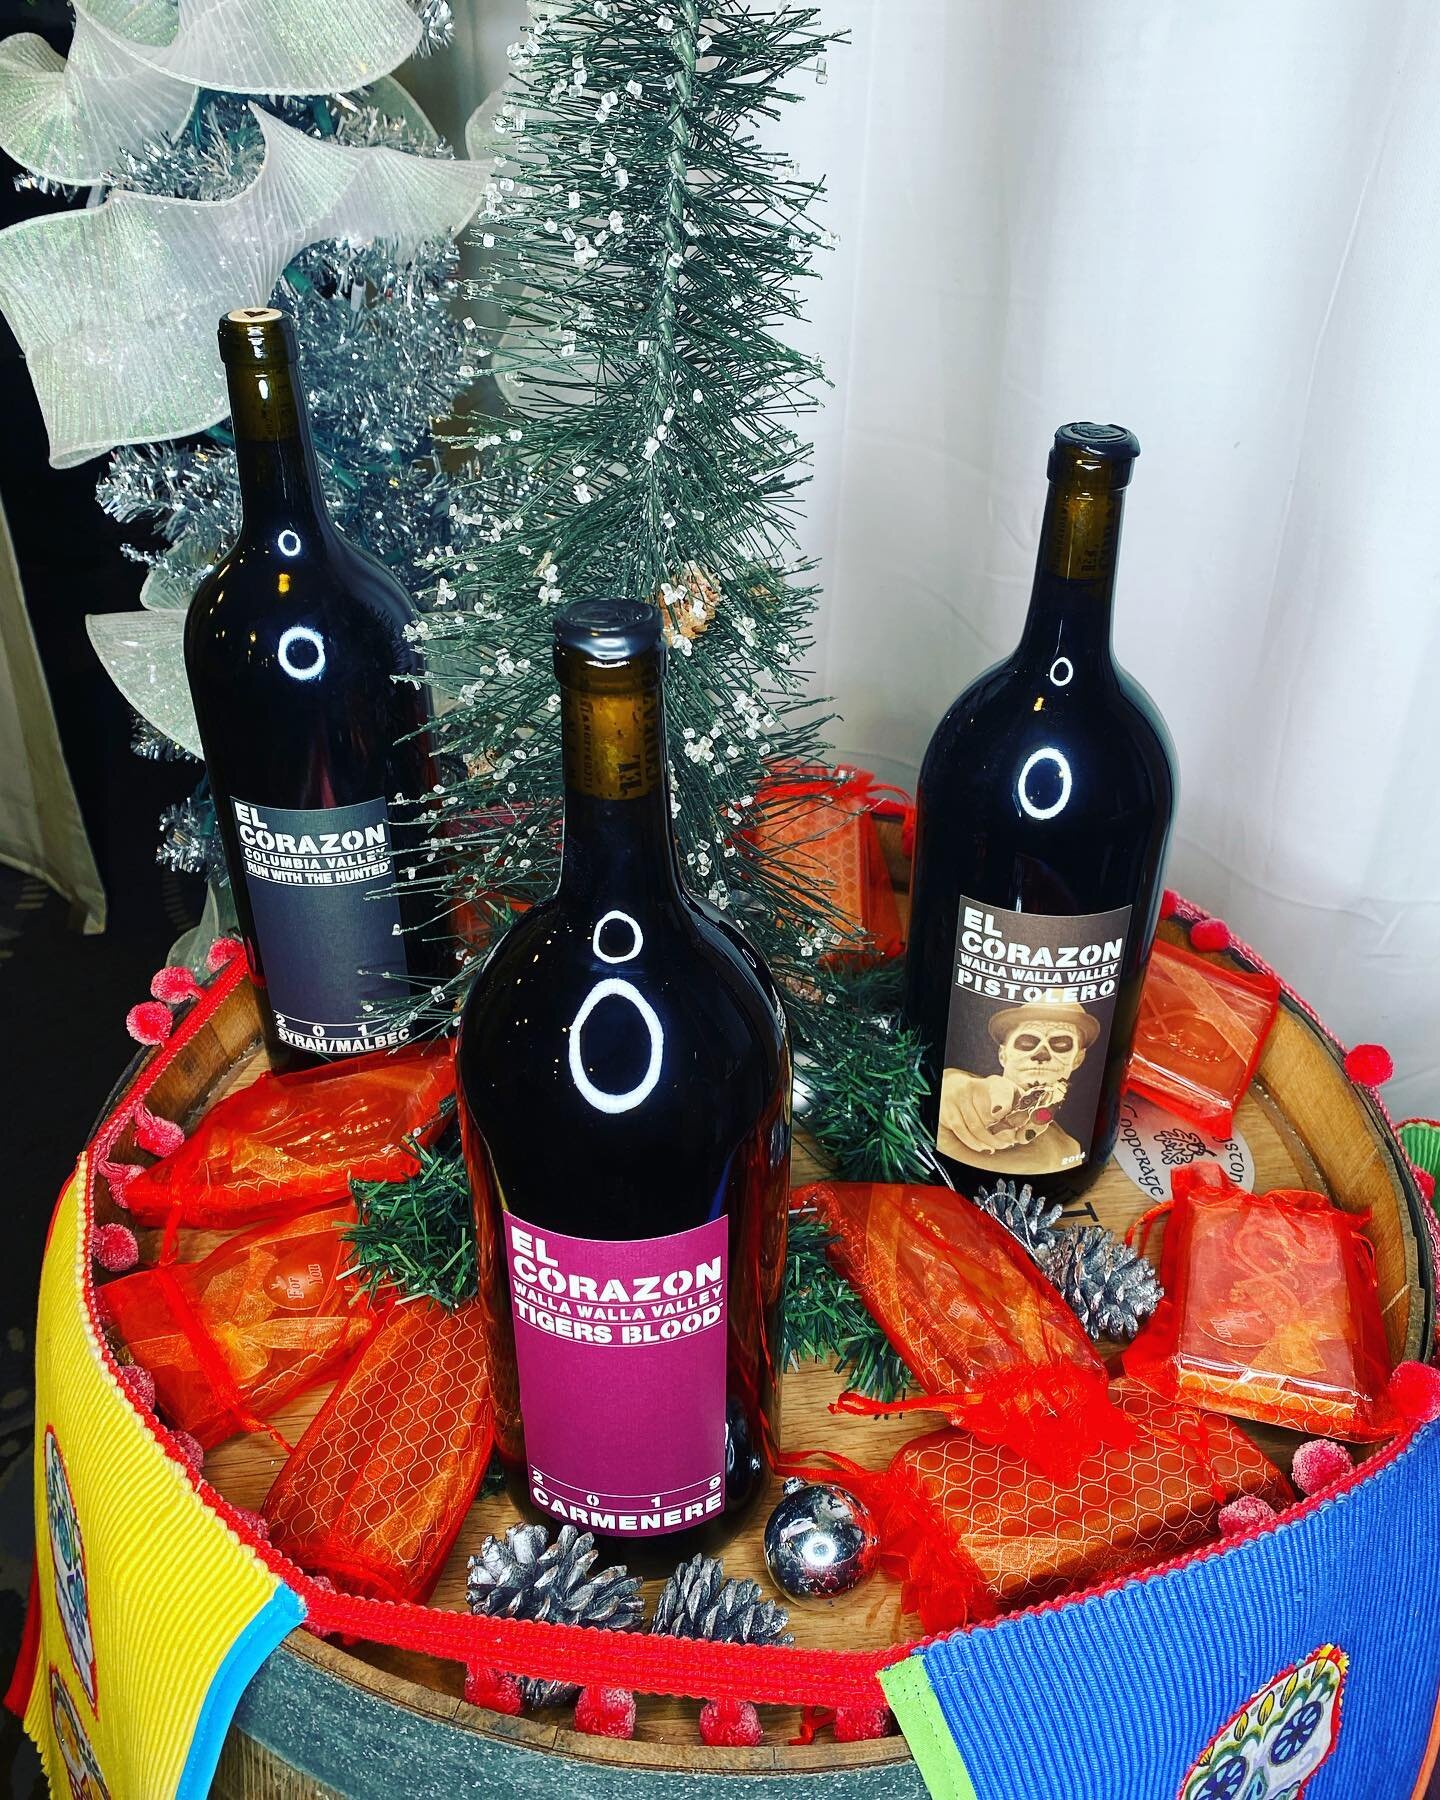 Tigers Blood, Run With the Hunted, and Pistolero magnums available for gifts, holiday parties or your cellar! Limited quantities, let us know if you want one held for pickup or shipped out!